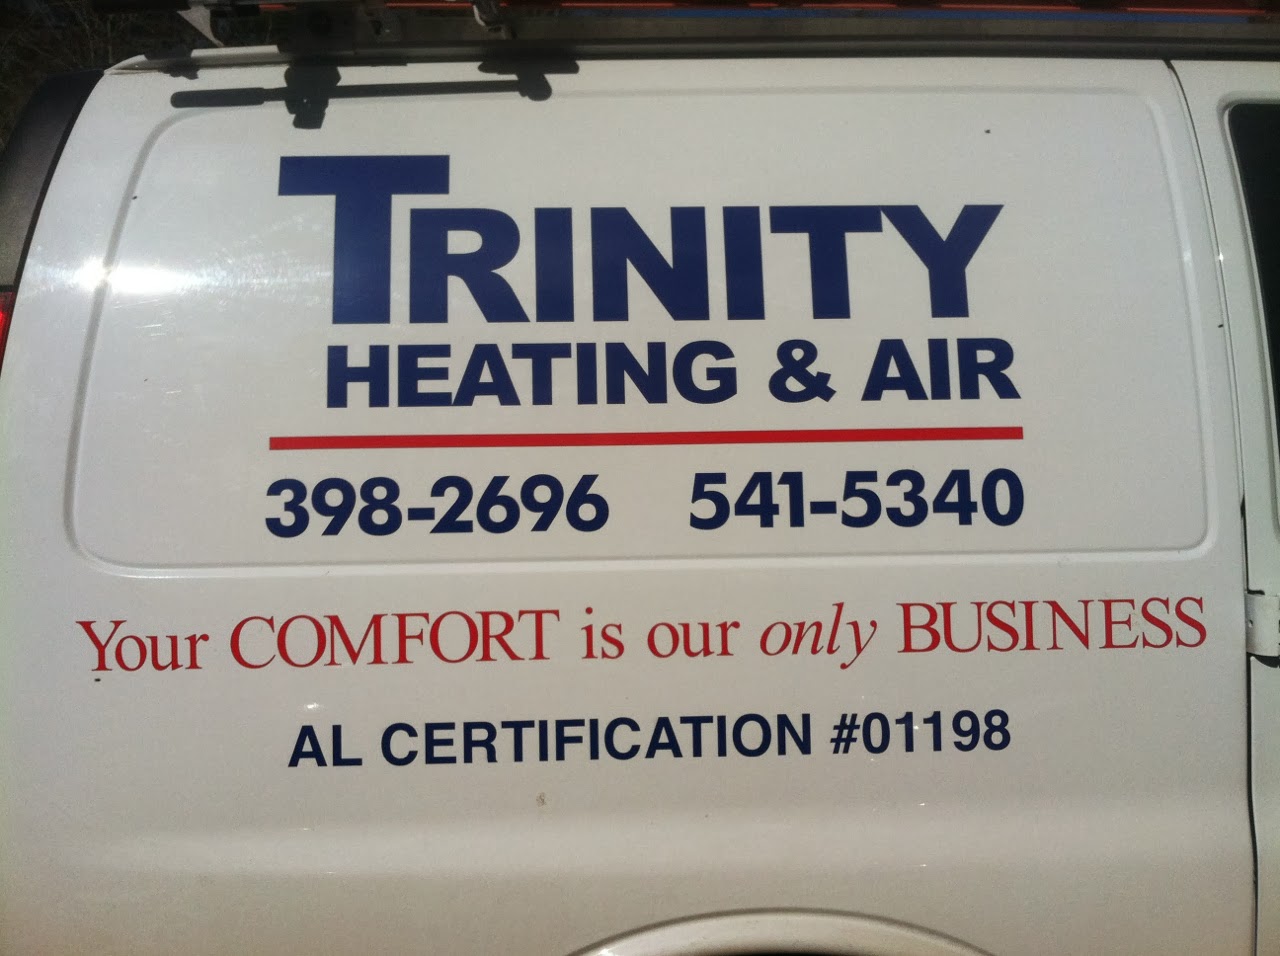 Trinity Heating & Air Conditioning Co Inc 147 Townsend Creek Rd, Eclectic Alabama 36024